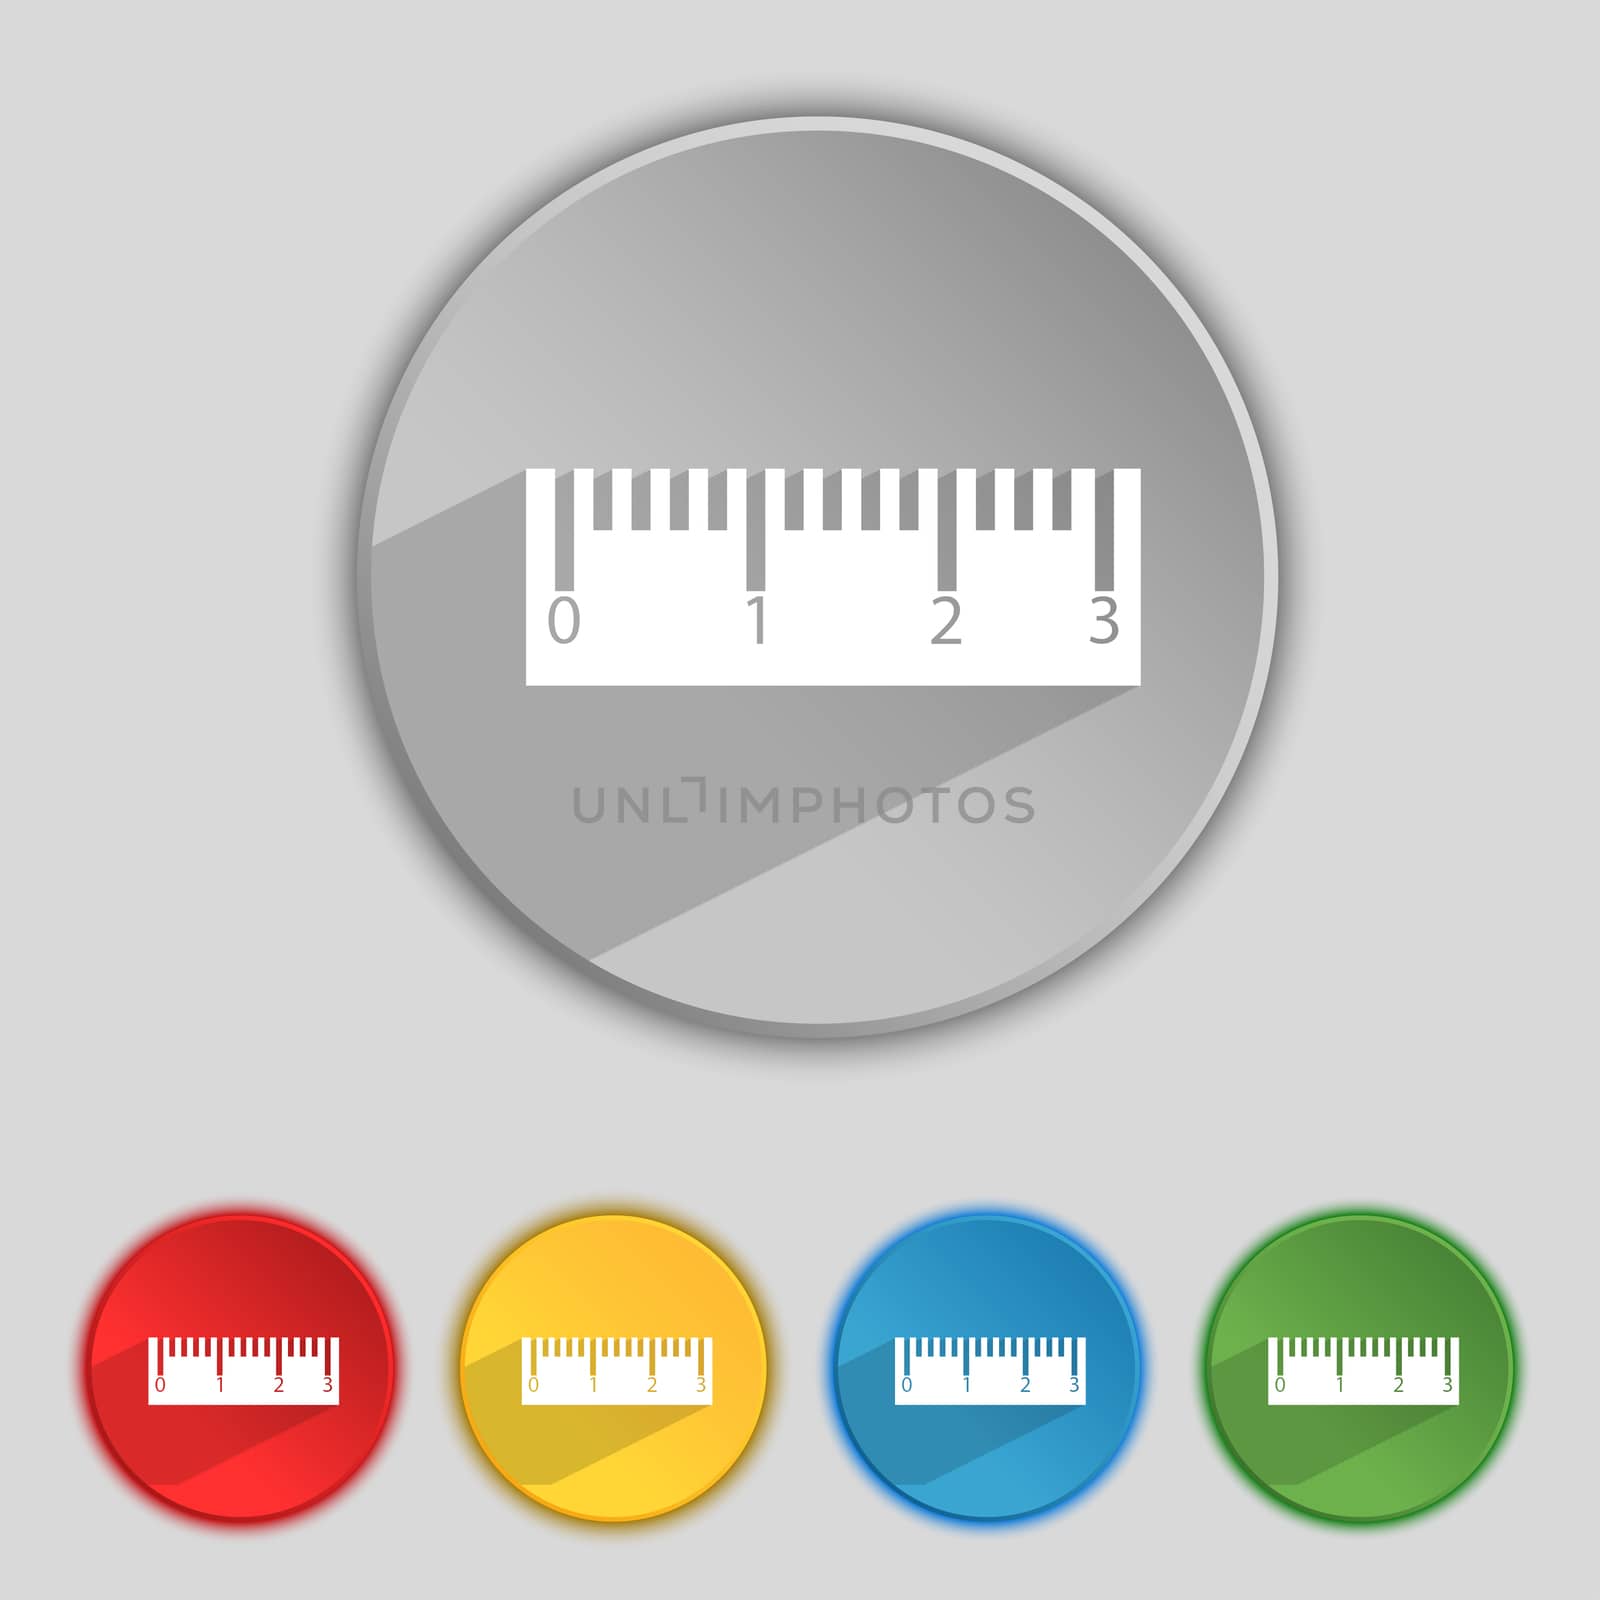 Ruler sign icon. School tool symbol. Set of colored buttons. illustration